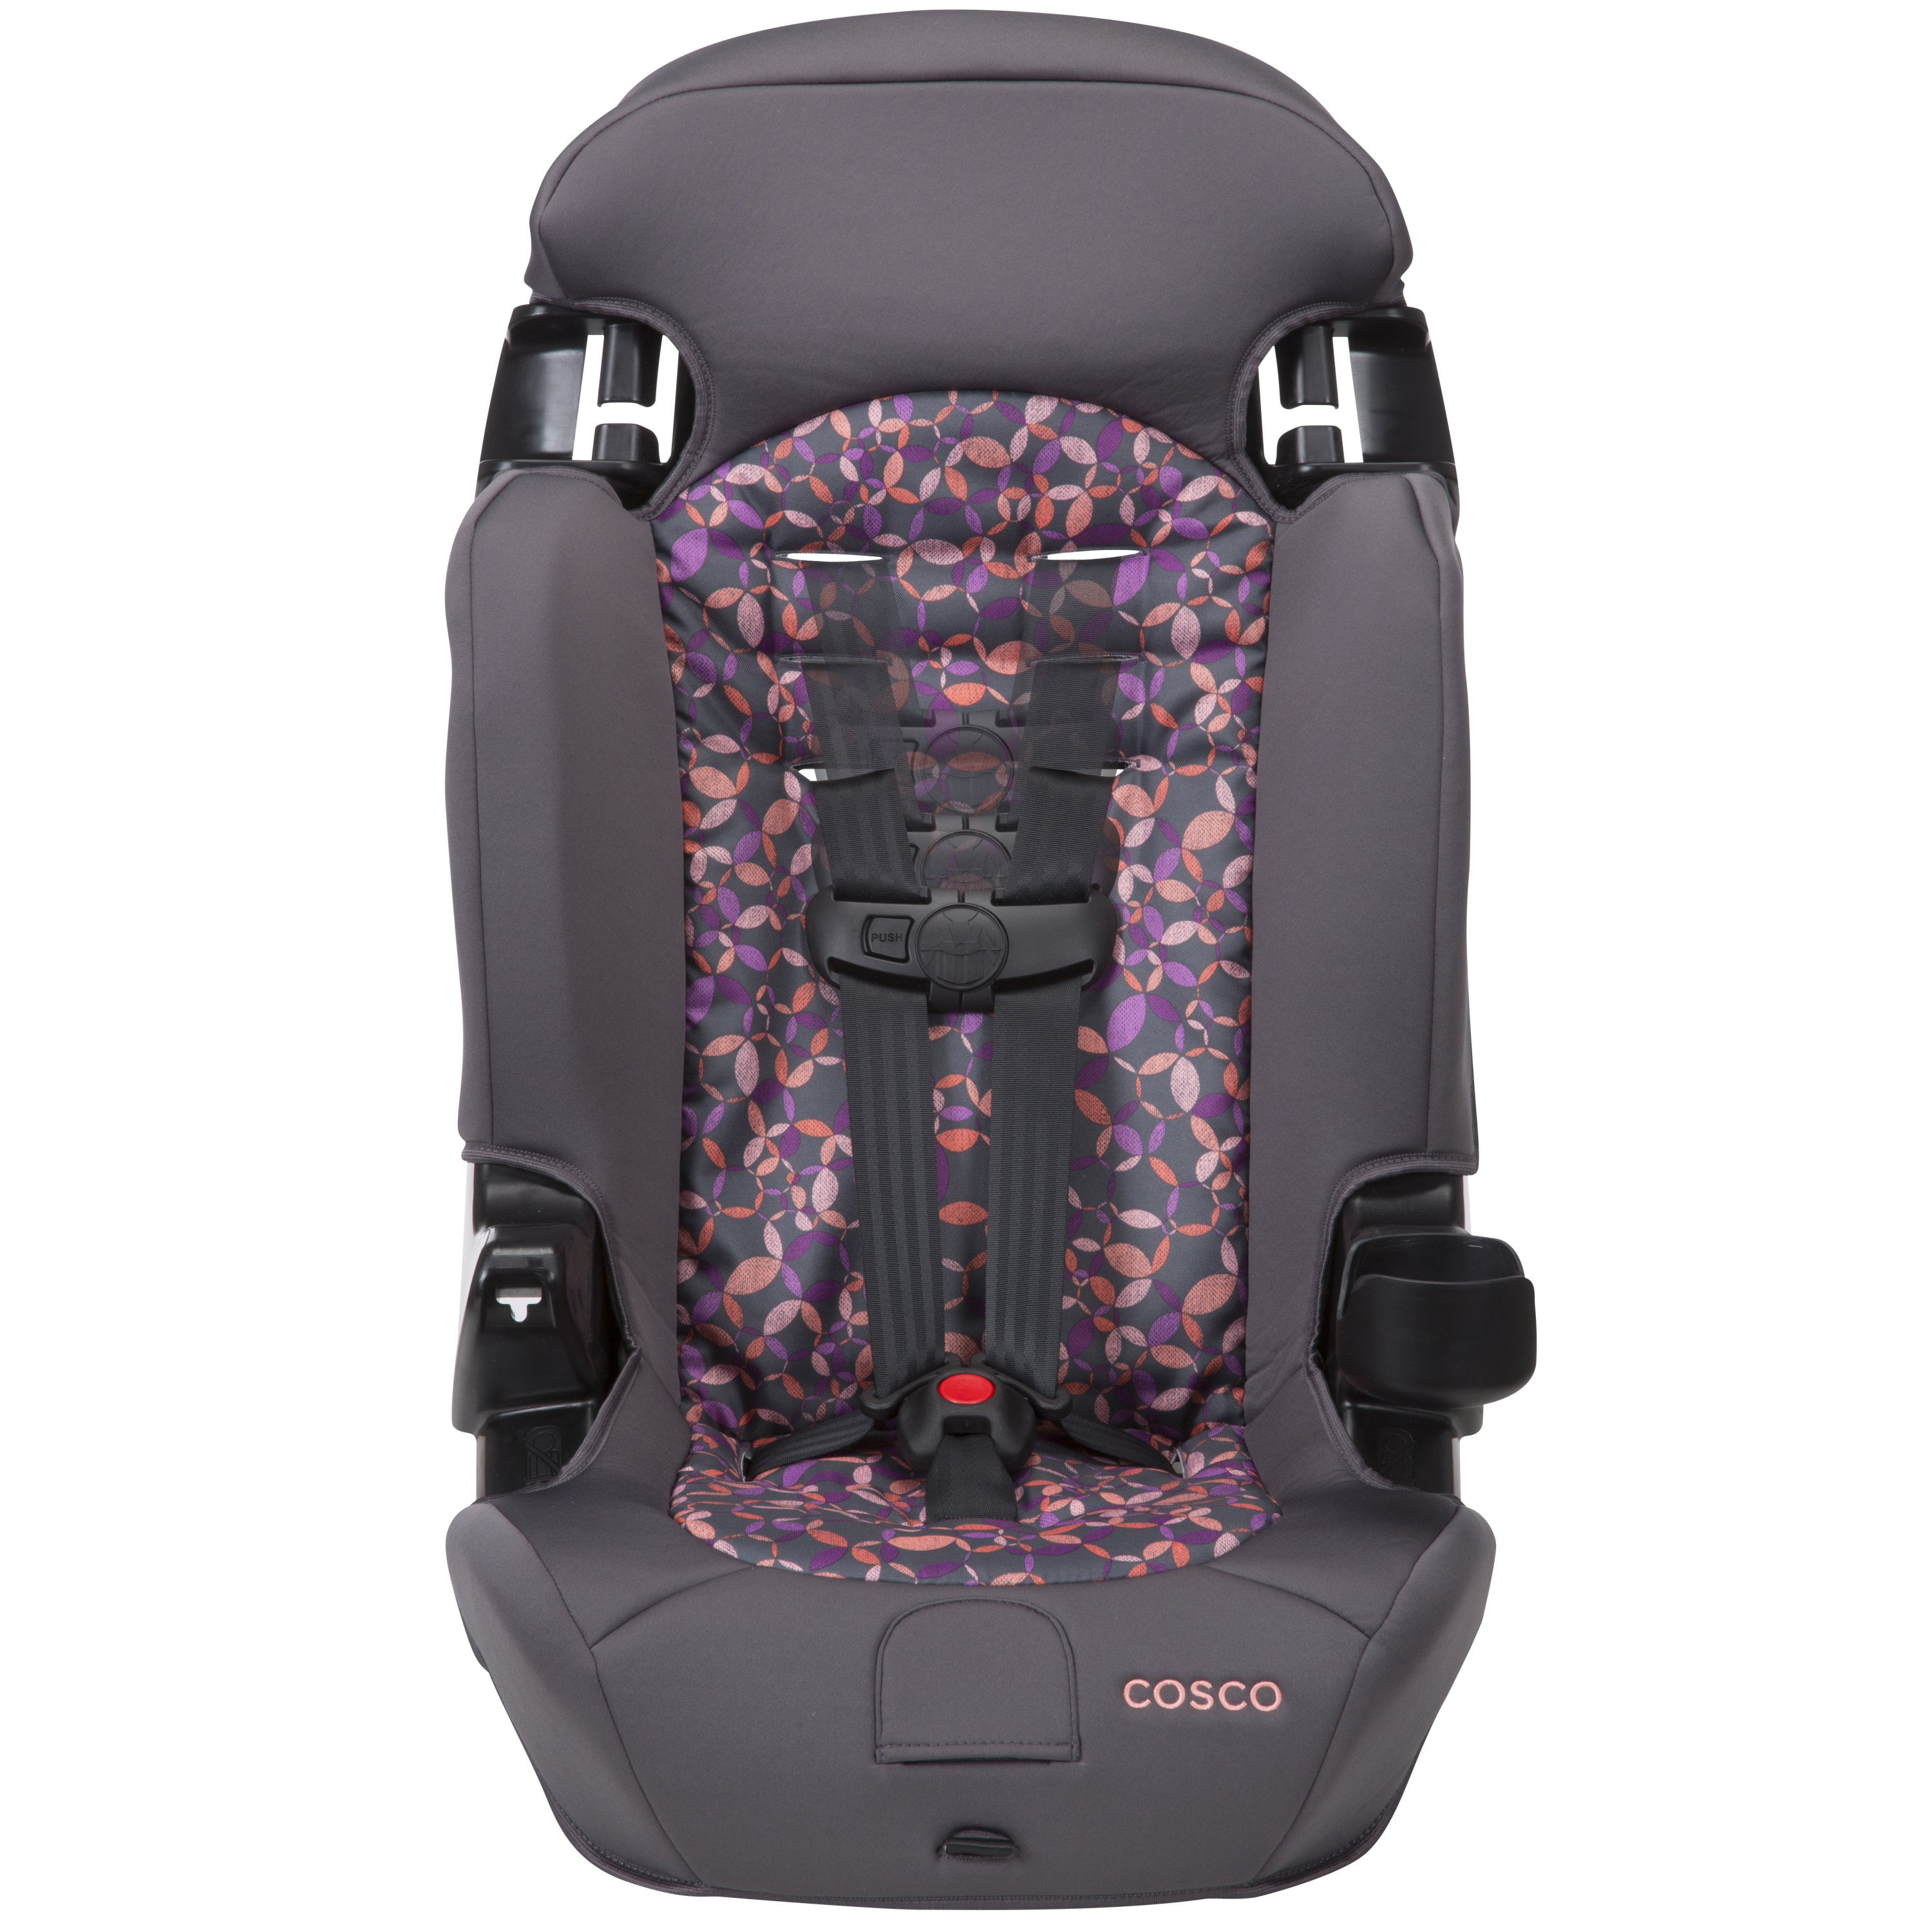 Cosco Finale Booster Car Seat, Floral Gray - image 2 of 25